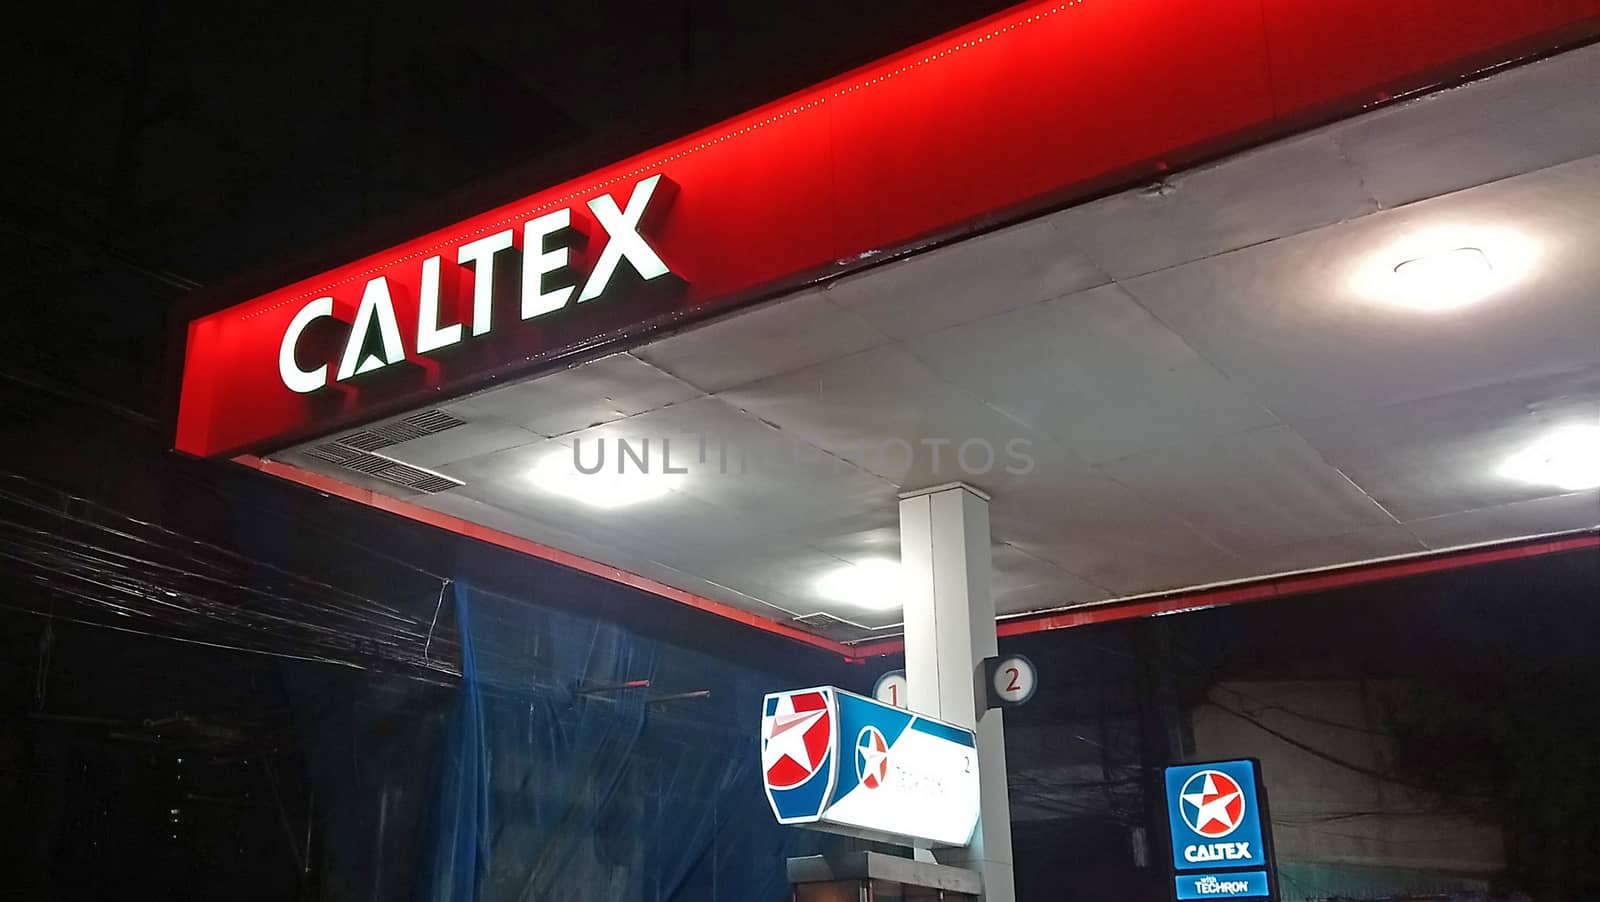 Caltex gas station in Quezon City, Philippines by imwaltersy